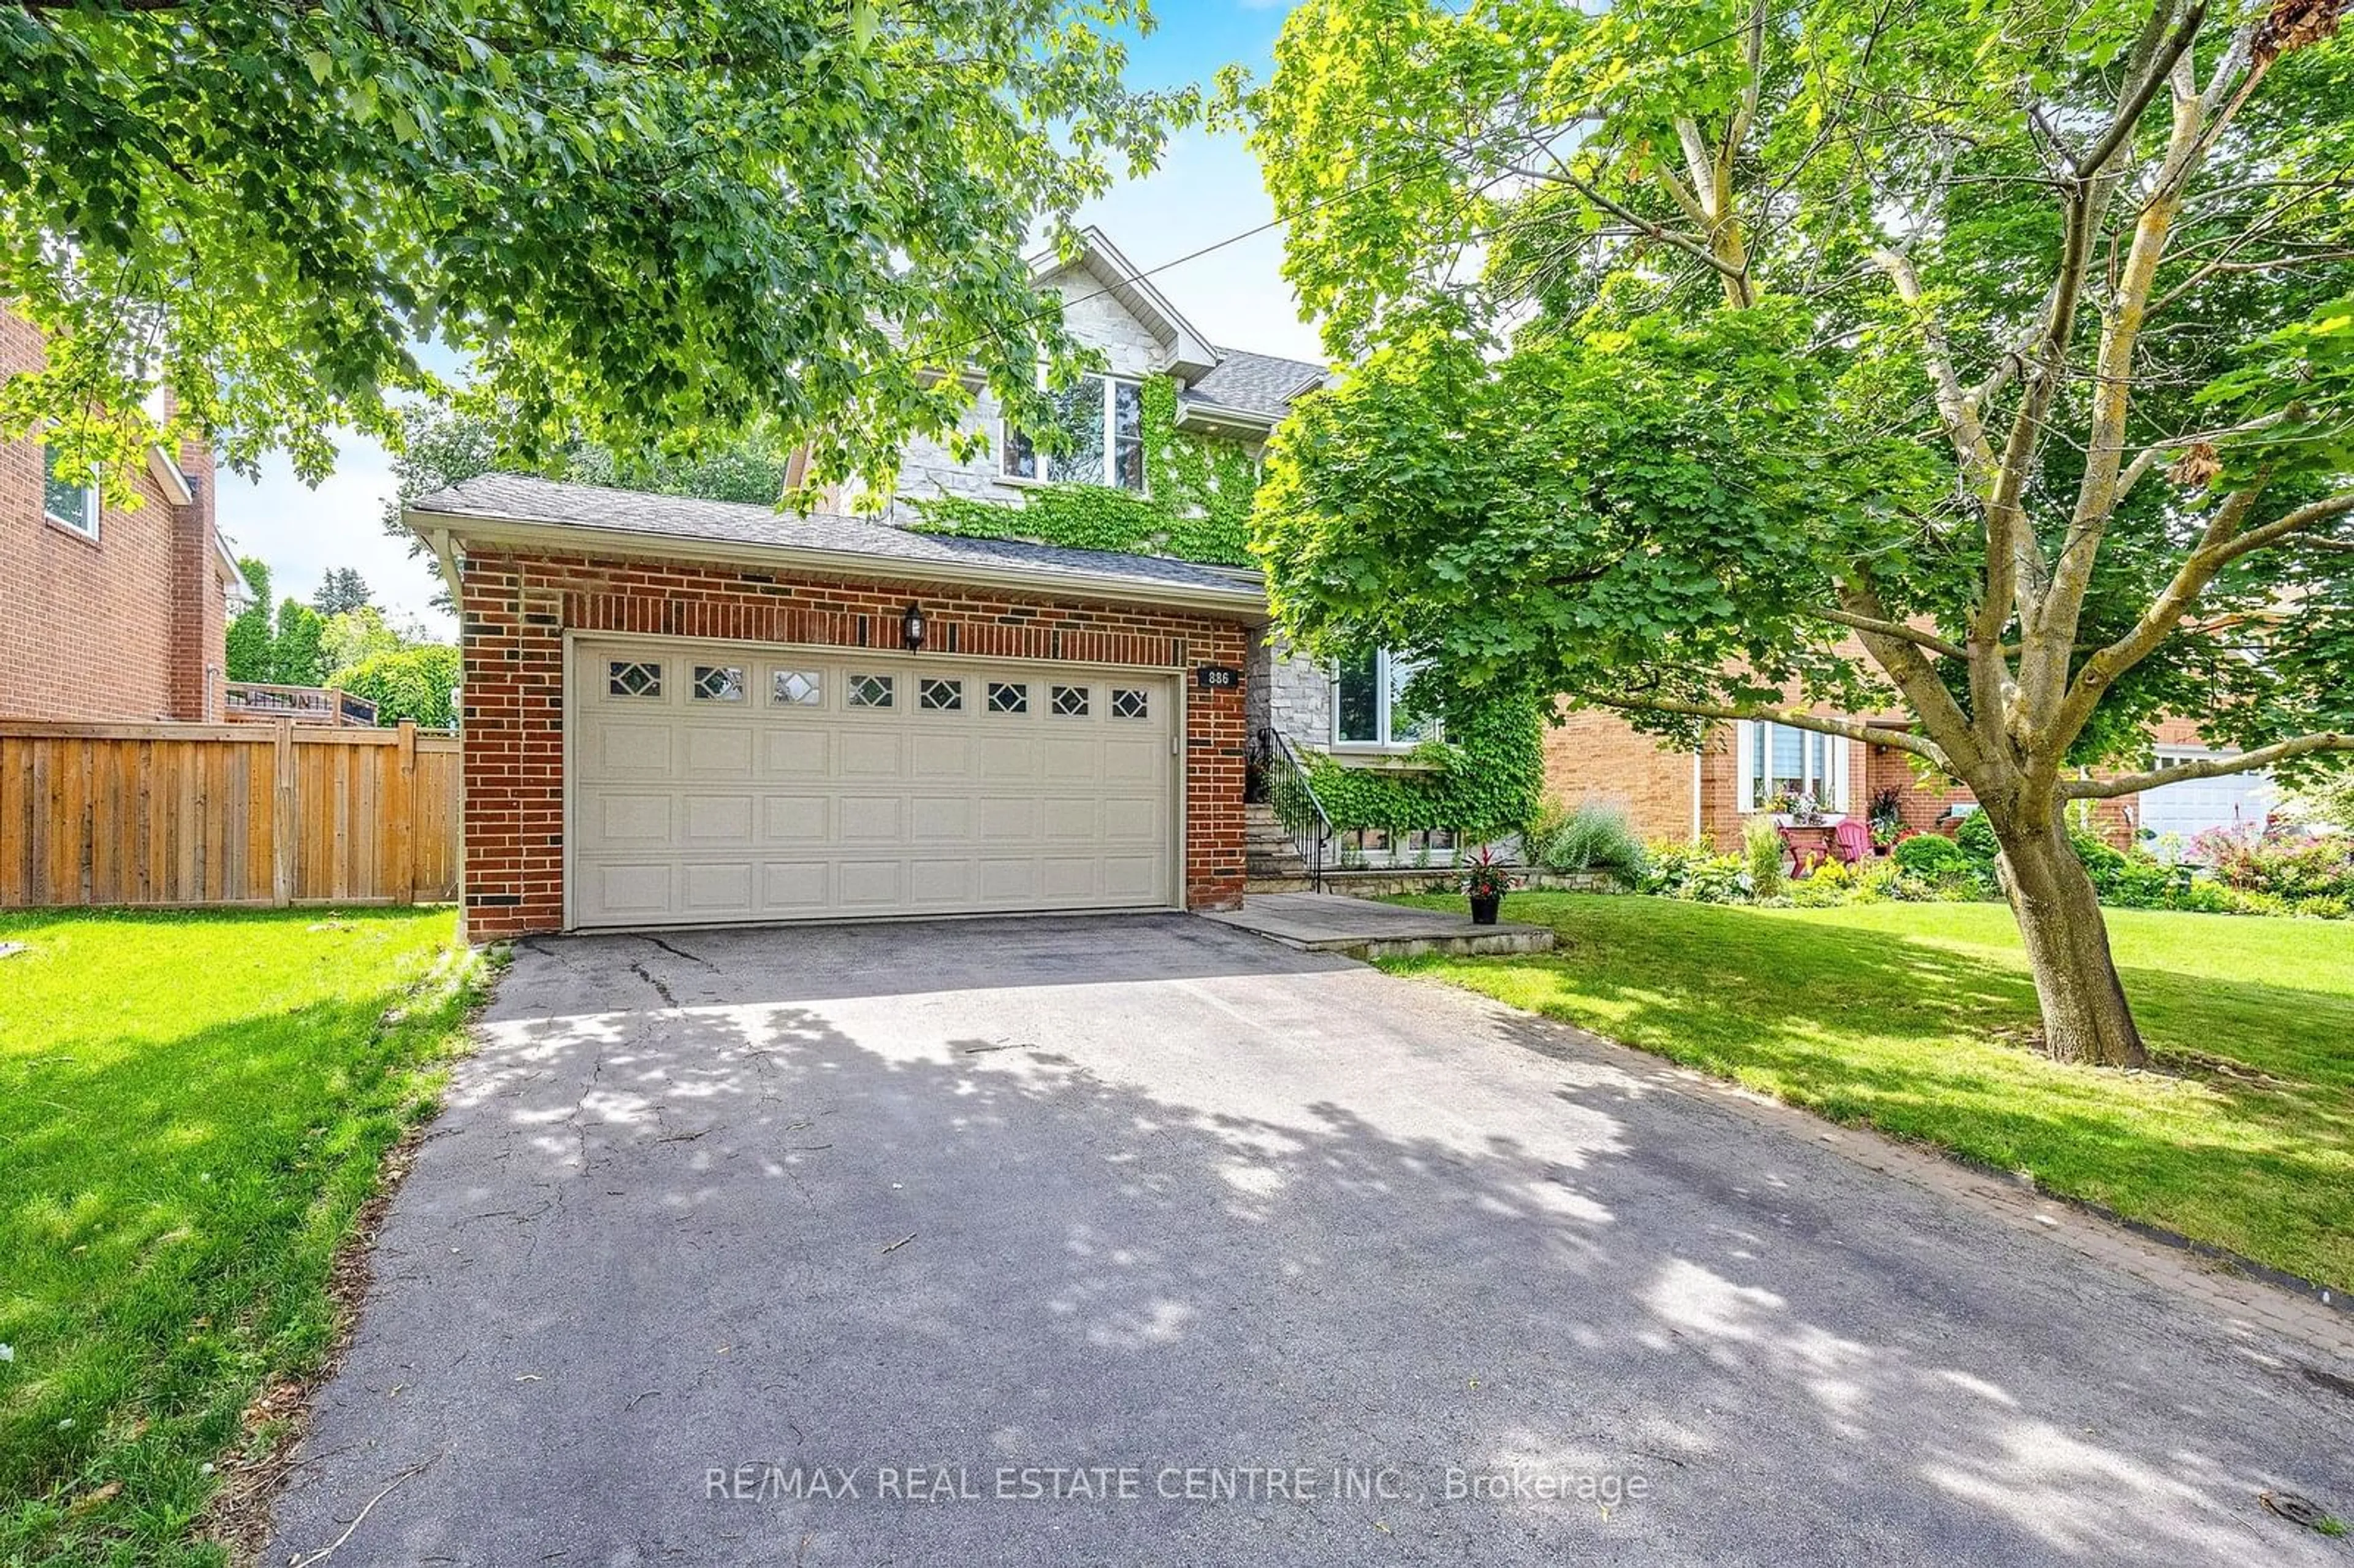 Frontside or backside of a home for 886 Childs Dr, Milton Ontario L9T 4J6